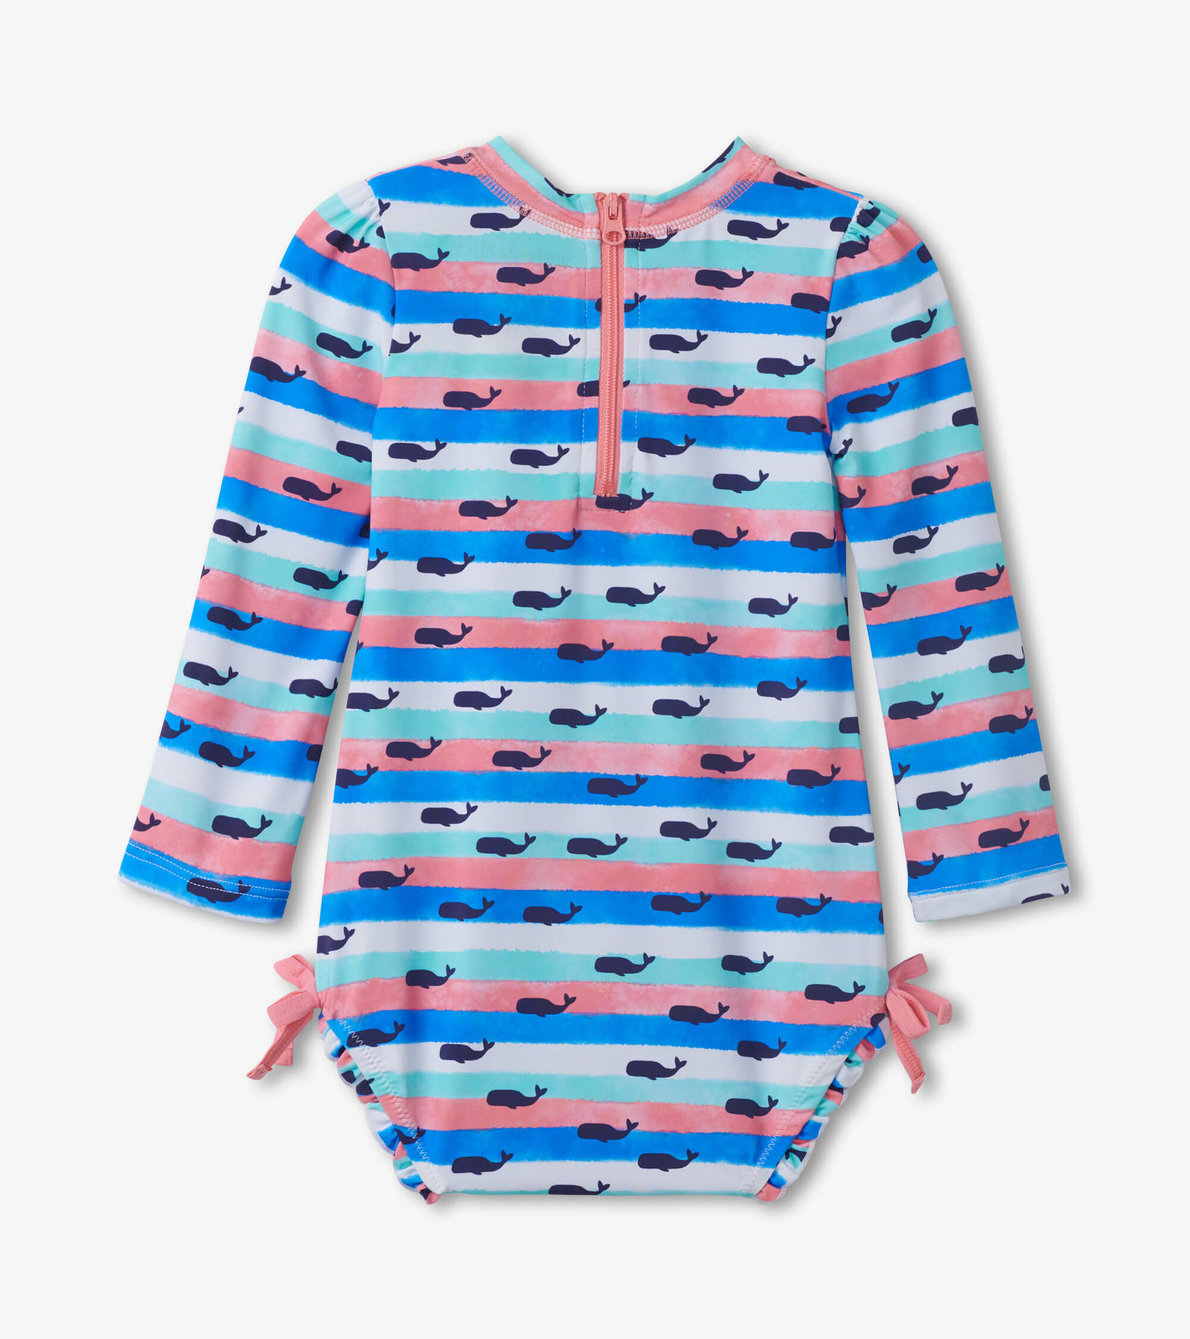 View larger image of Nautical Whales Baby Rashguard Swimsuit